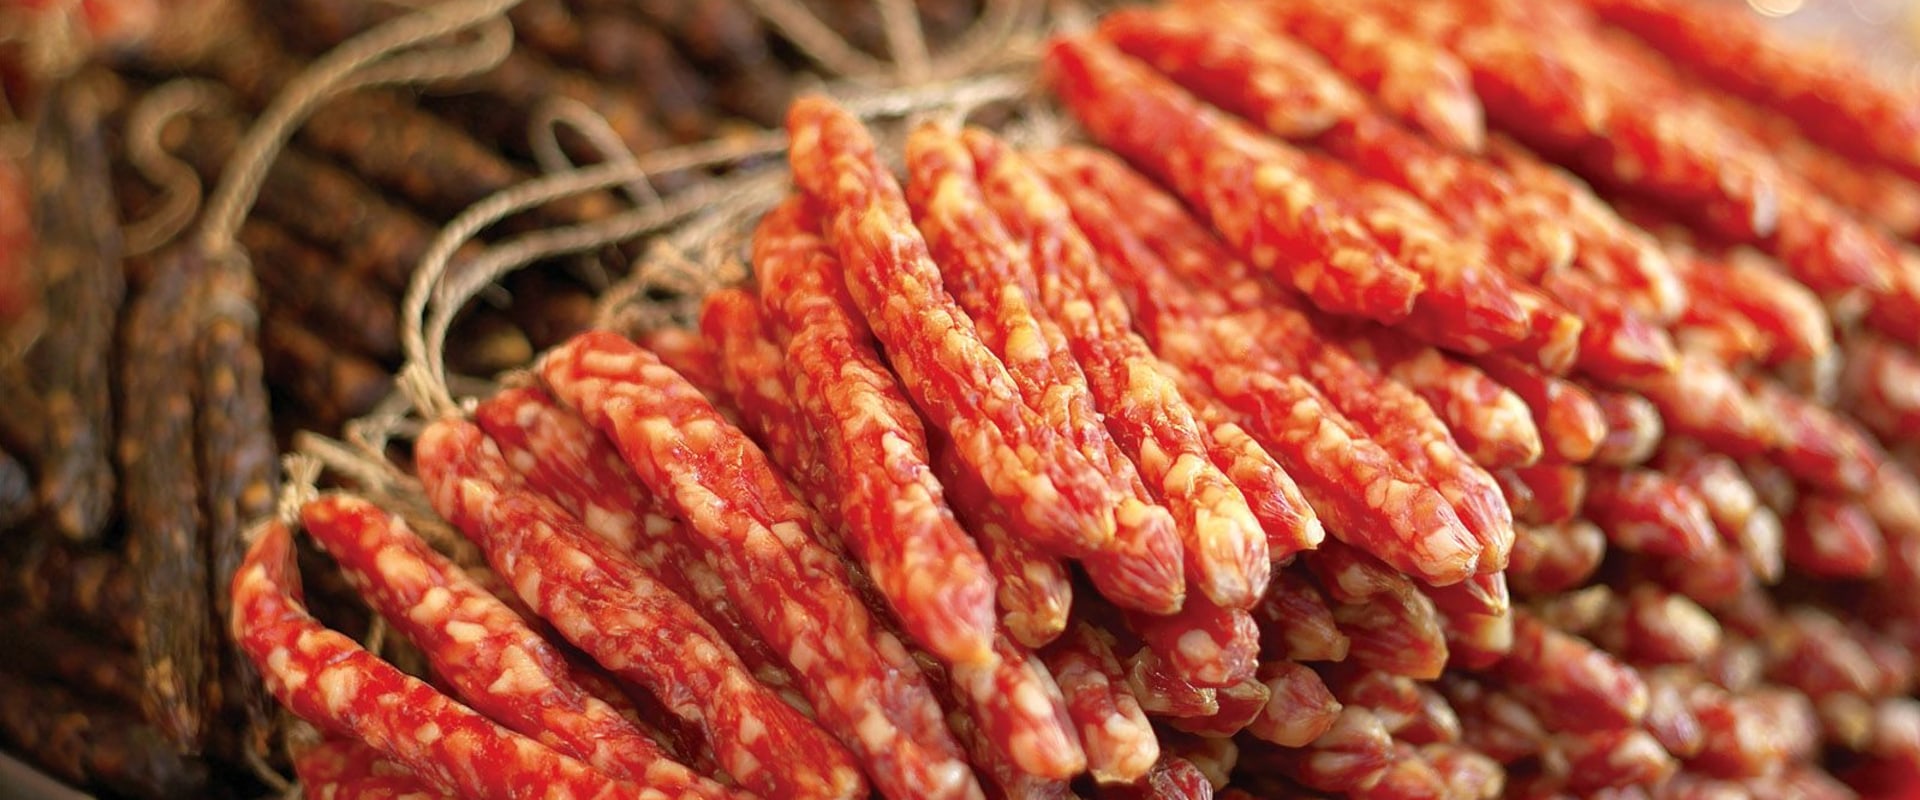 Is chinese sausage processed meat?